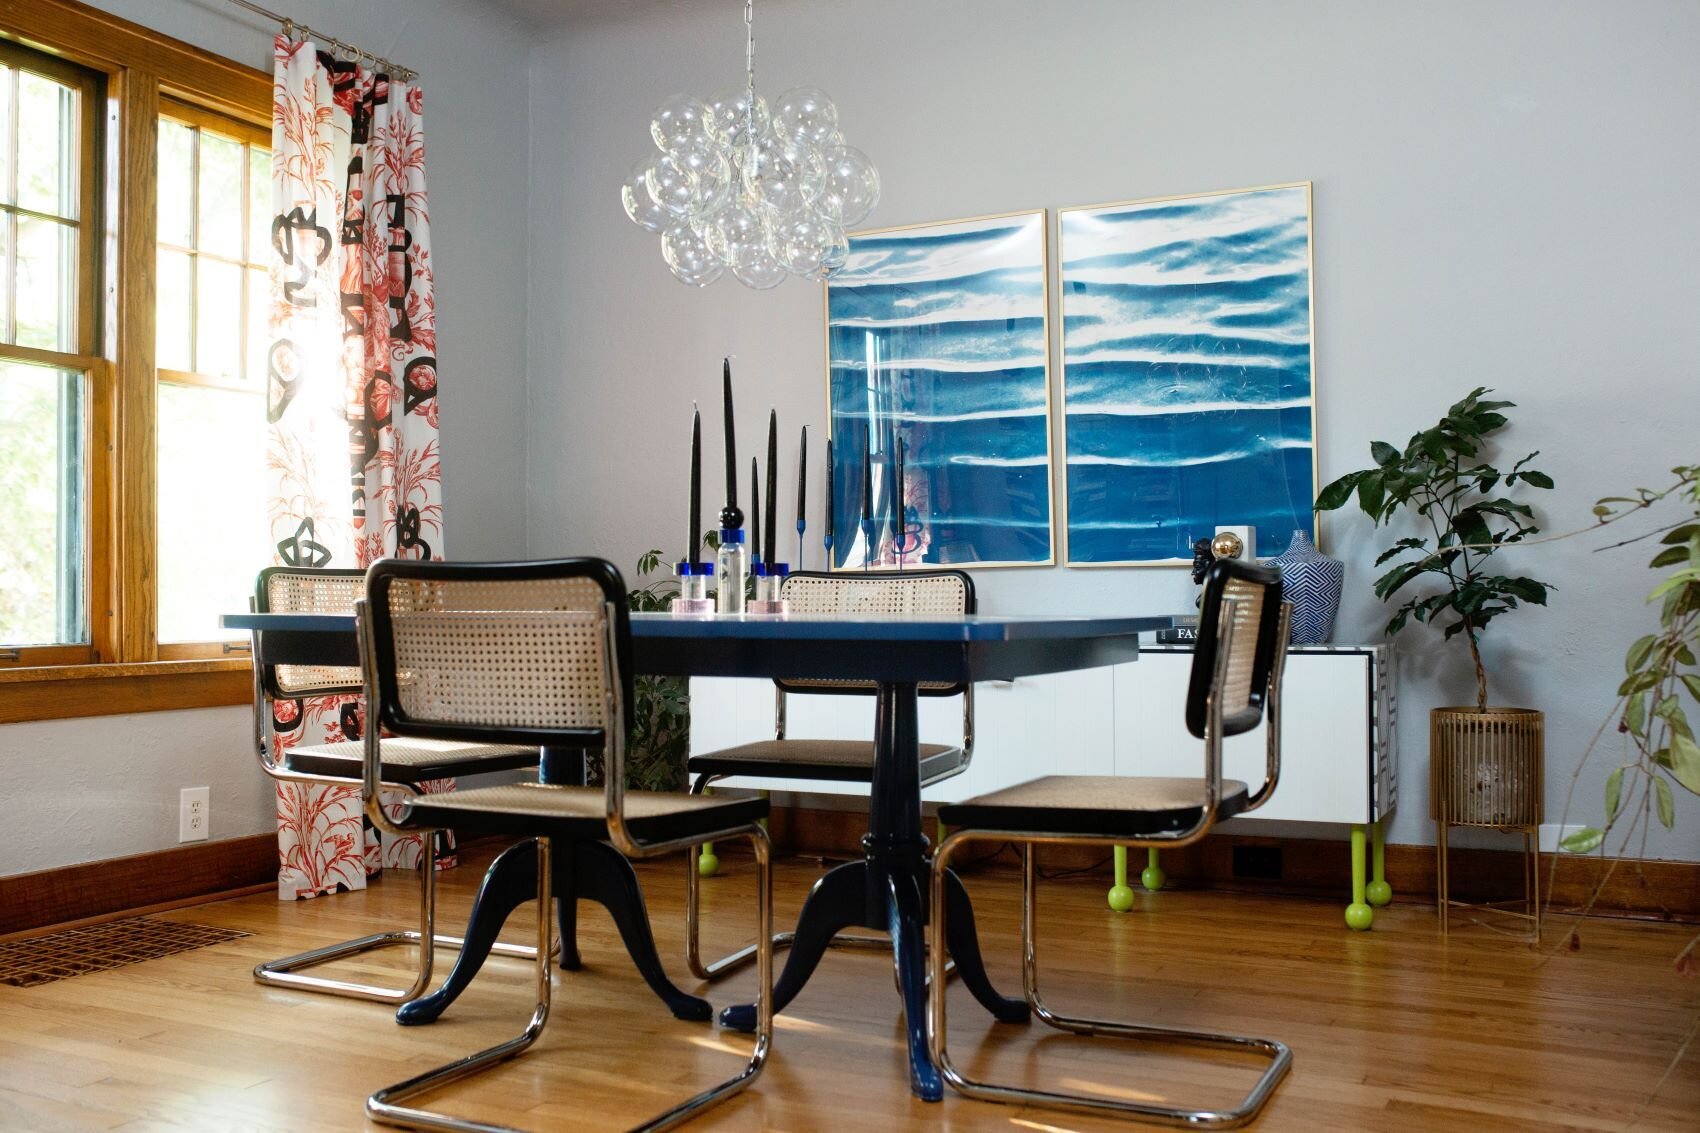 30  Blue  laquer table with black cesca chairs bubble chandelier blue modern art red pierre frey curtains.jpg